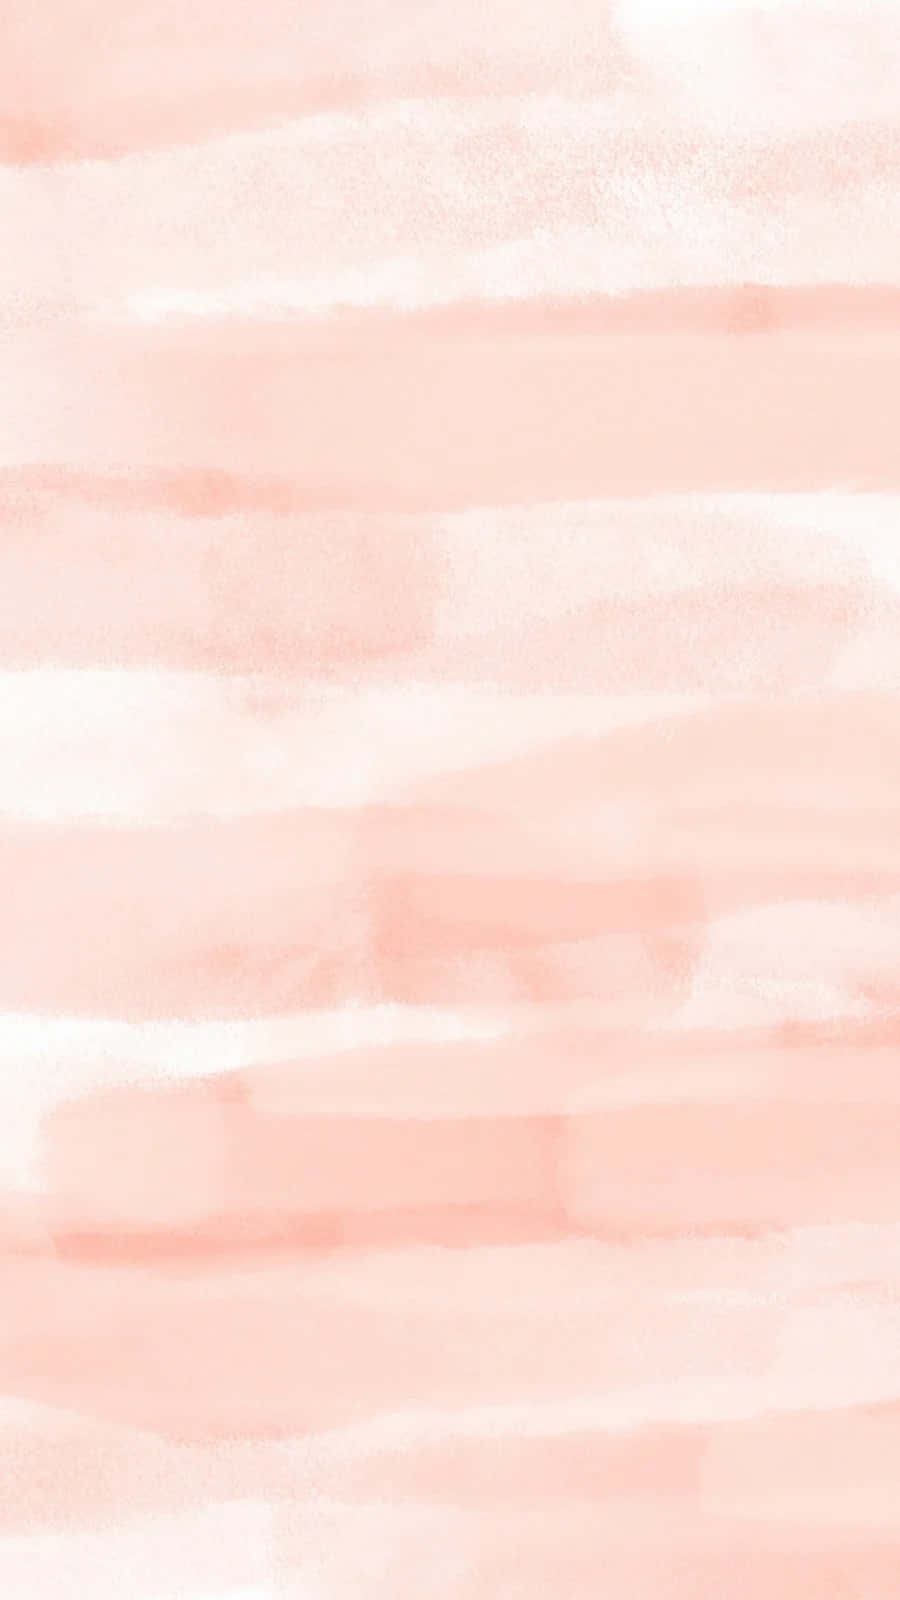 A Pink Watercolor Background With White Stripes